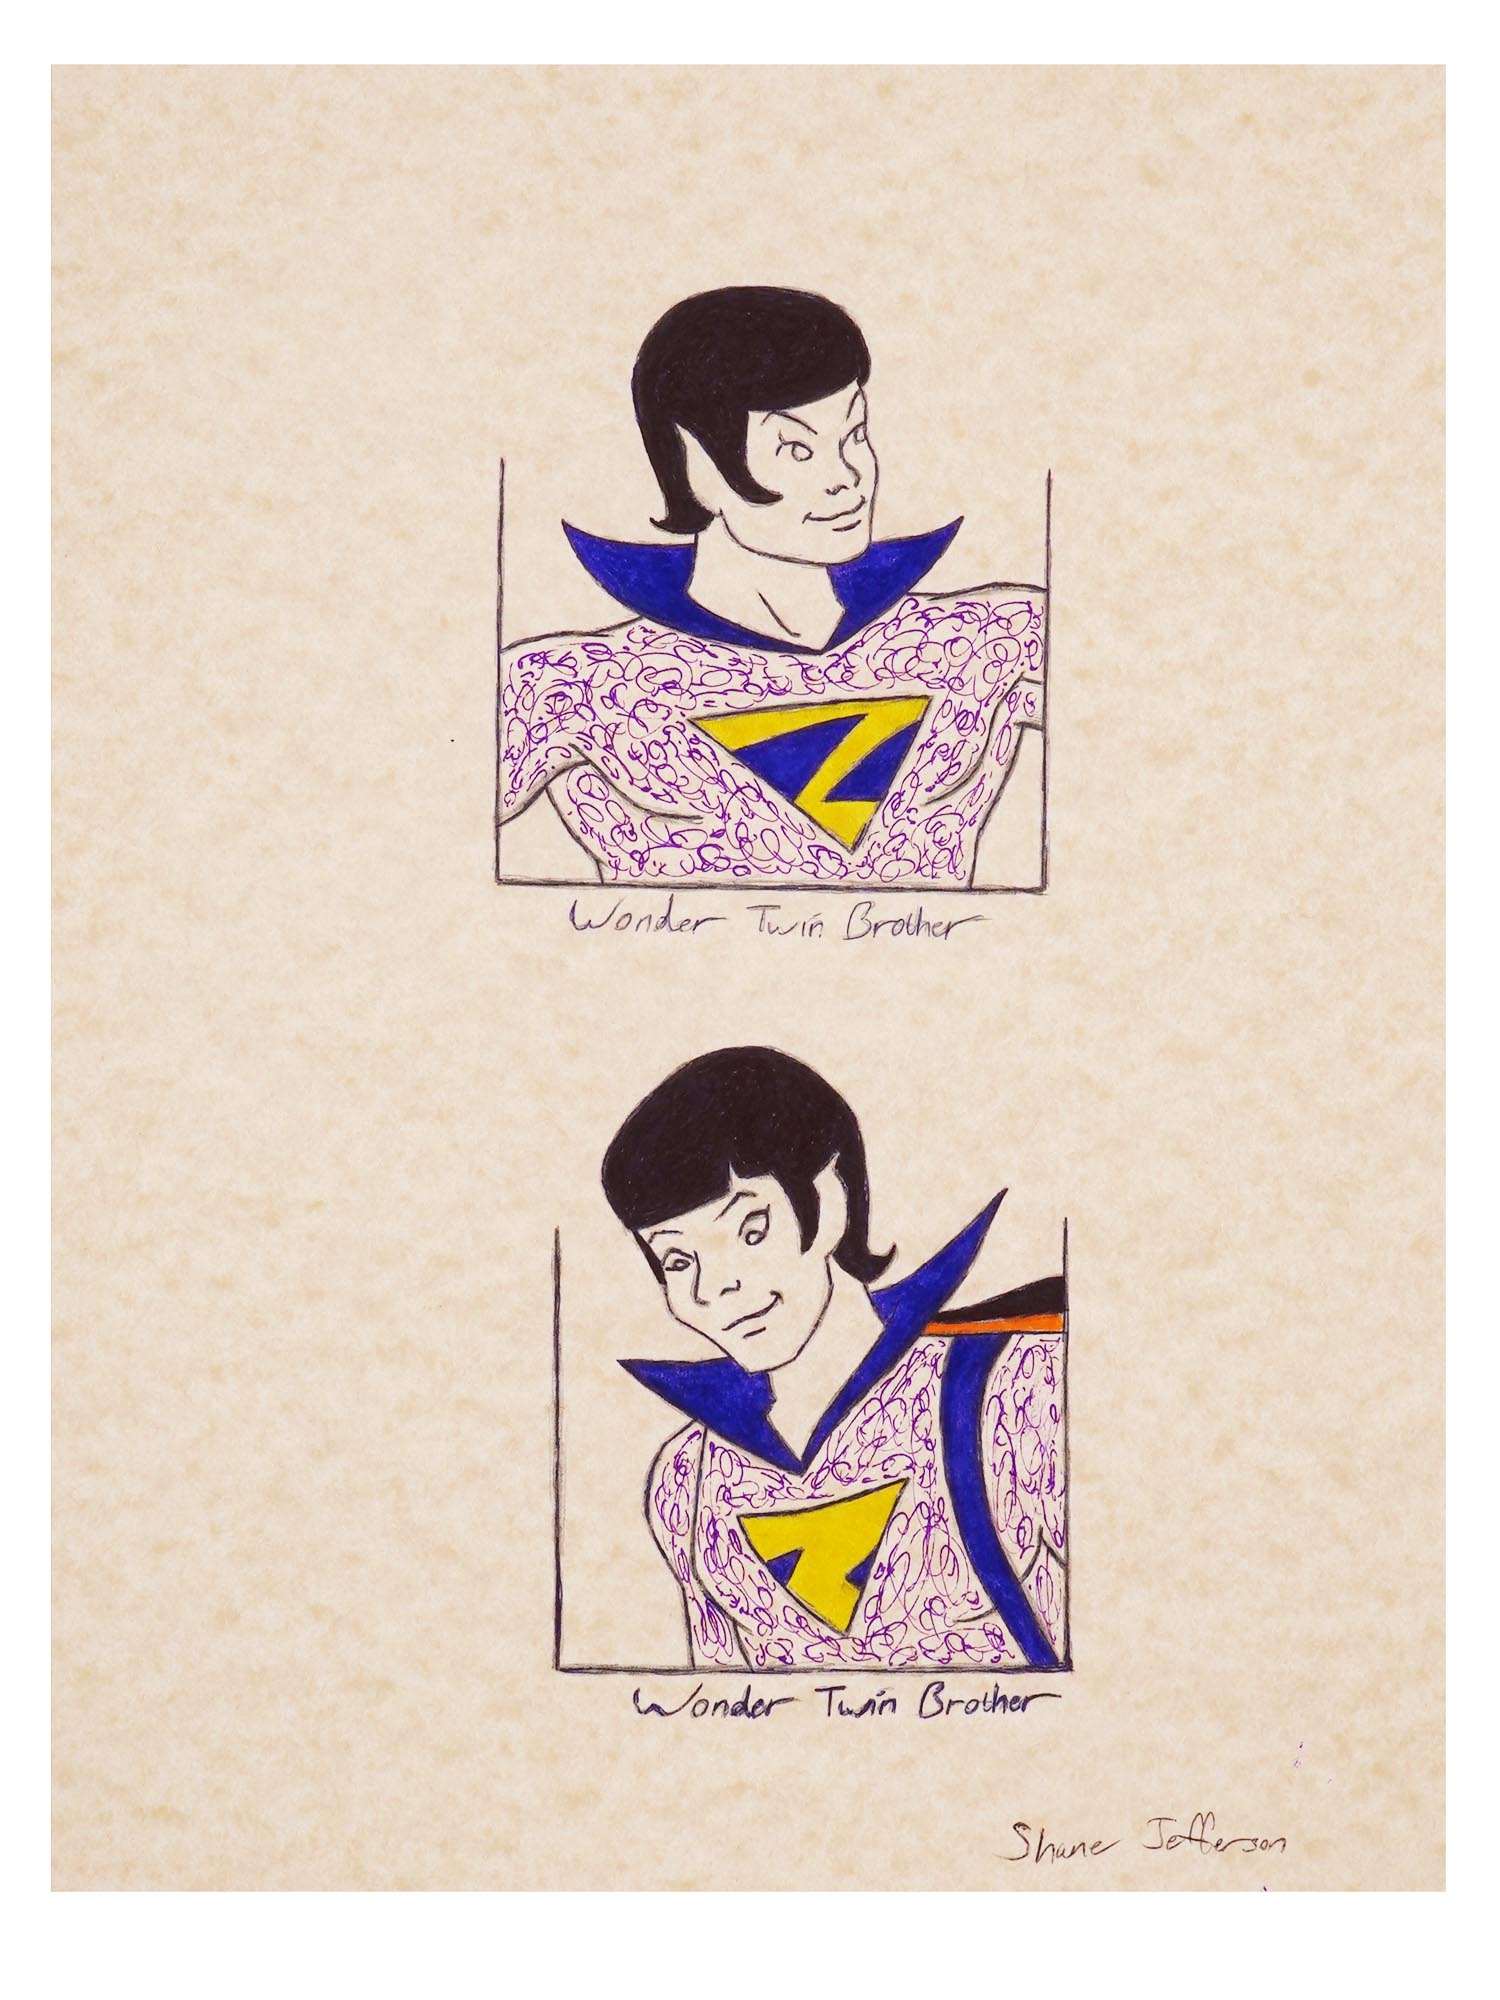 AMERICAN WONDER TWINS PAINTINGS BY SHANE JEFFERSON PIC-5